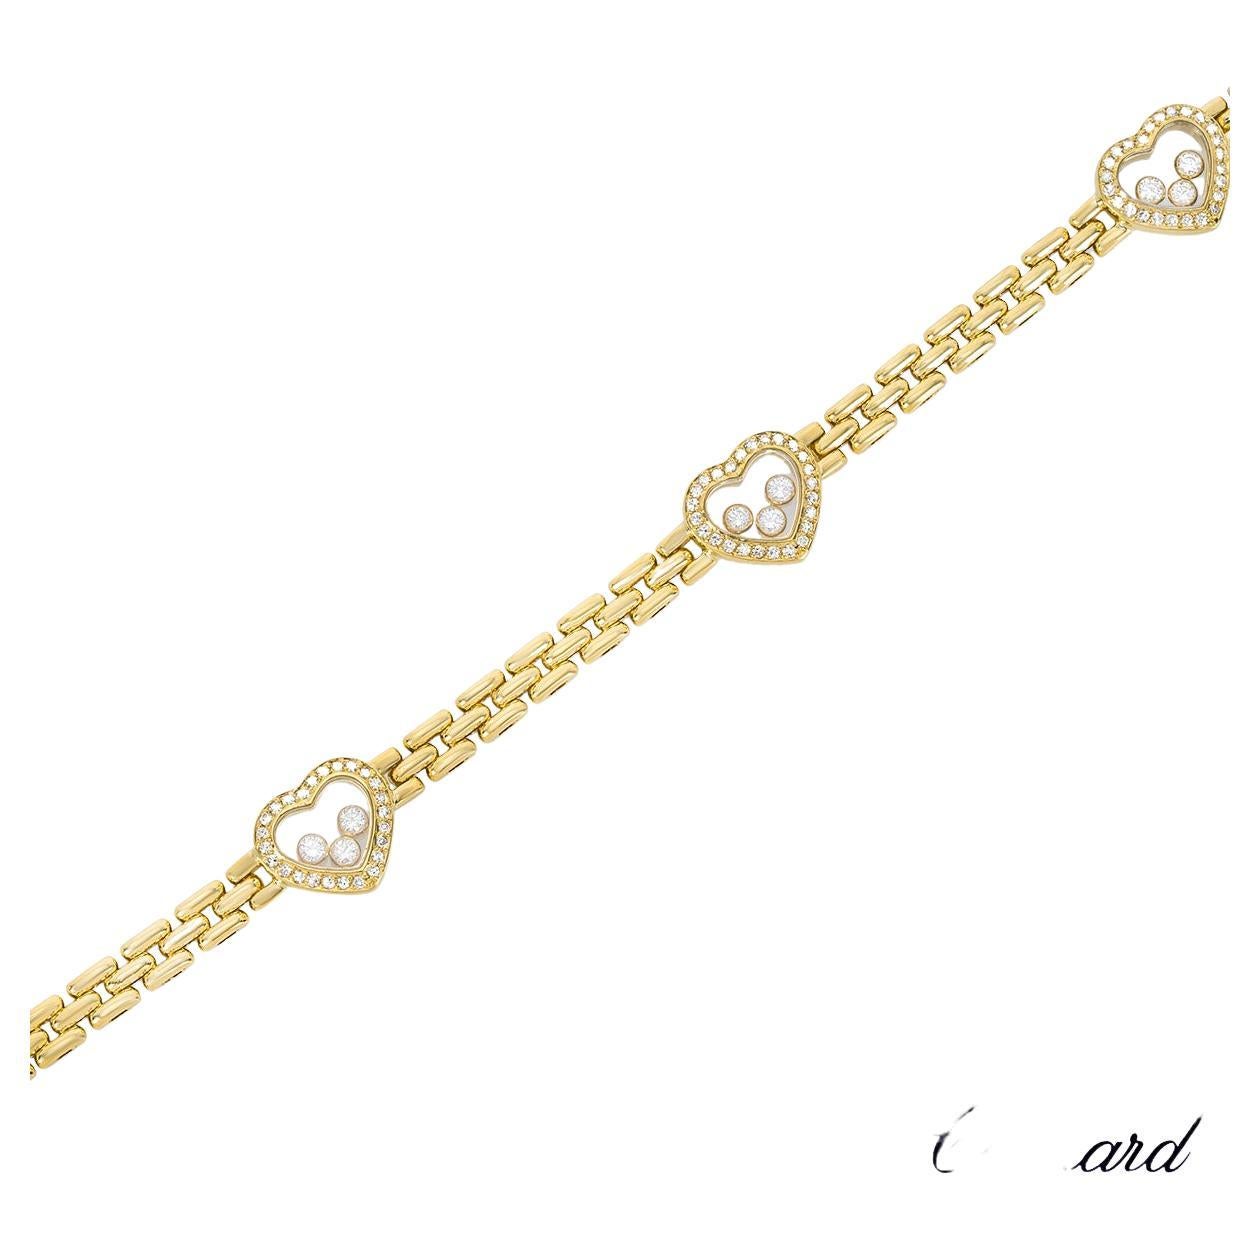 A classy 18k yellow gold diamond bracelet by Chopard from the Happy Diamonds collection. The bracelet comprises of four heart shaped motifs each pave set with 25 single cut diamonds around the outer edge and 3 floating diamonds encased behind the